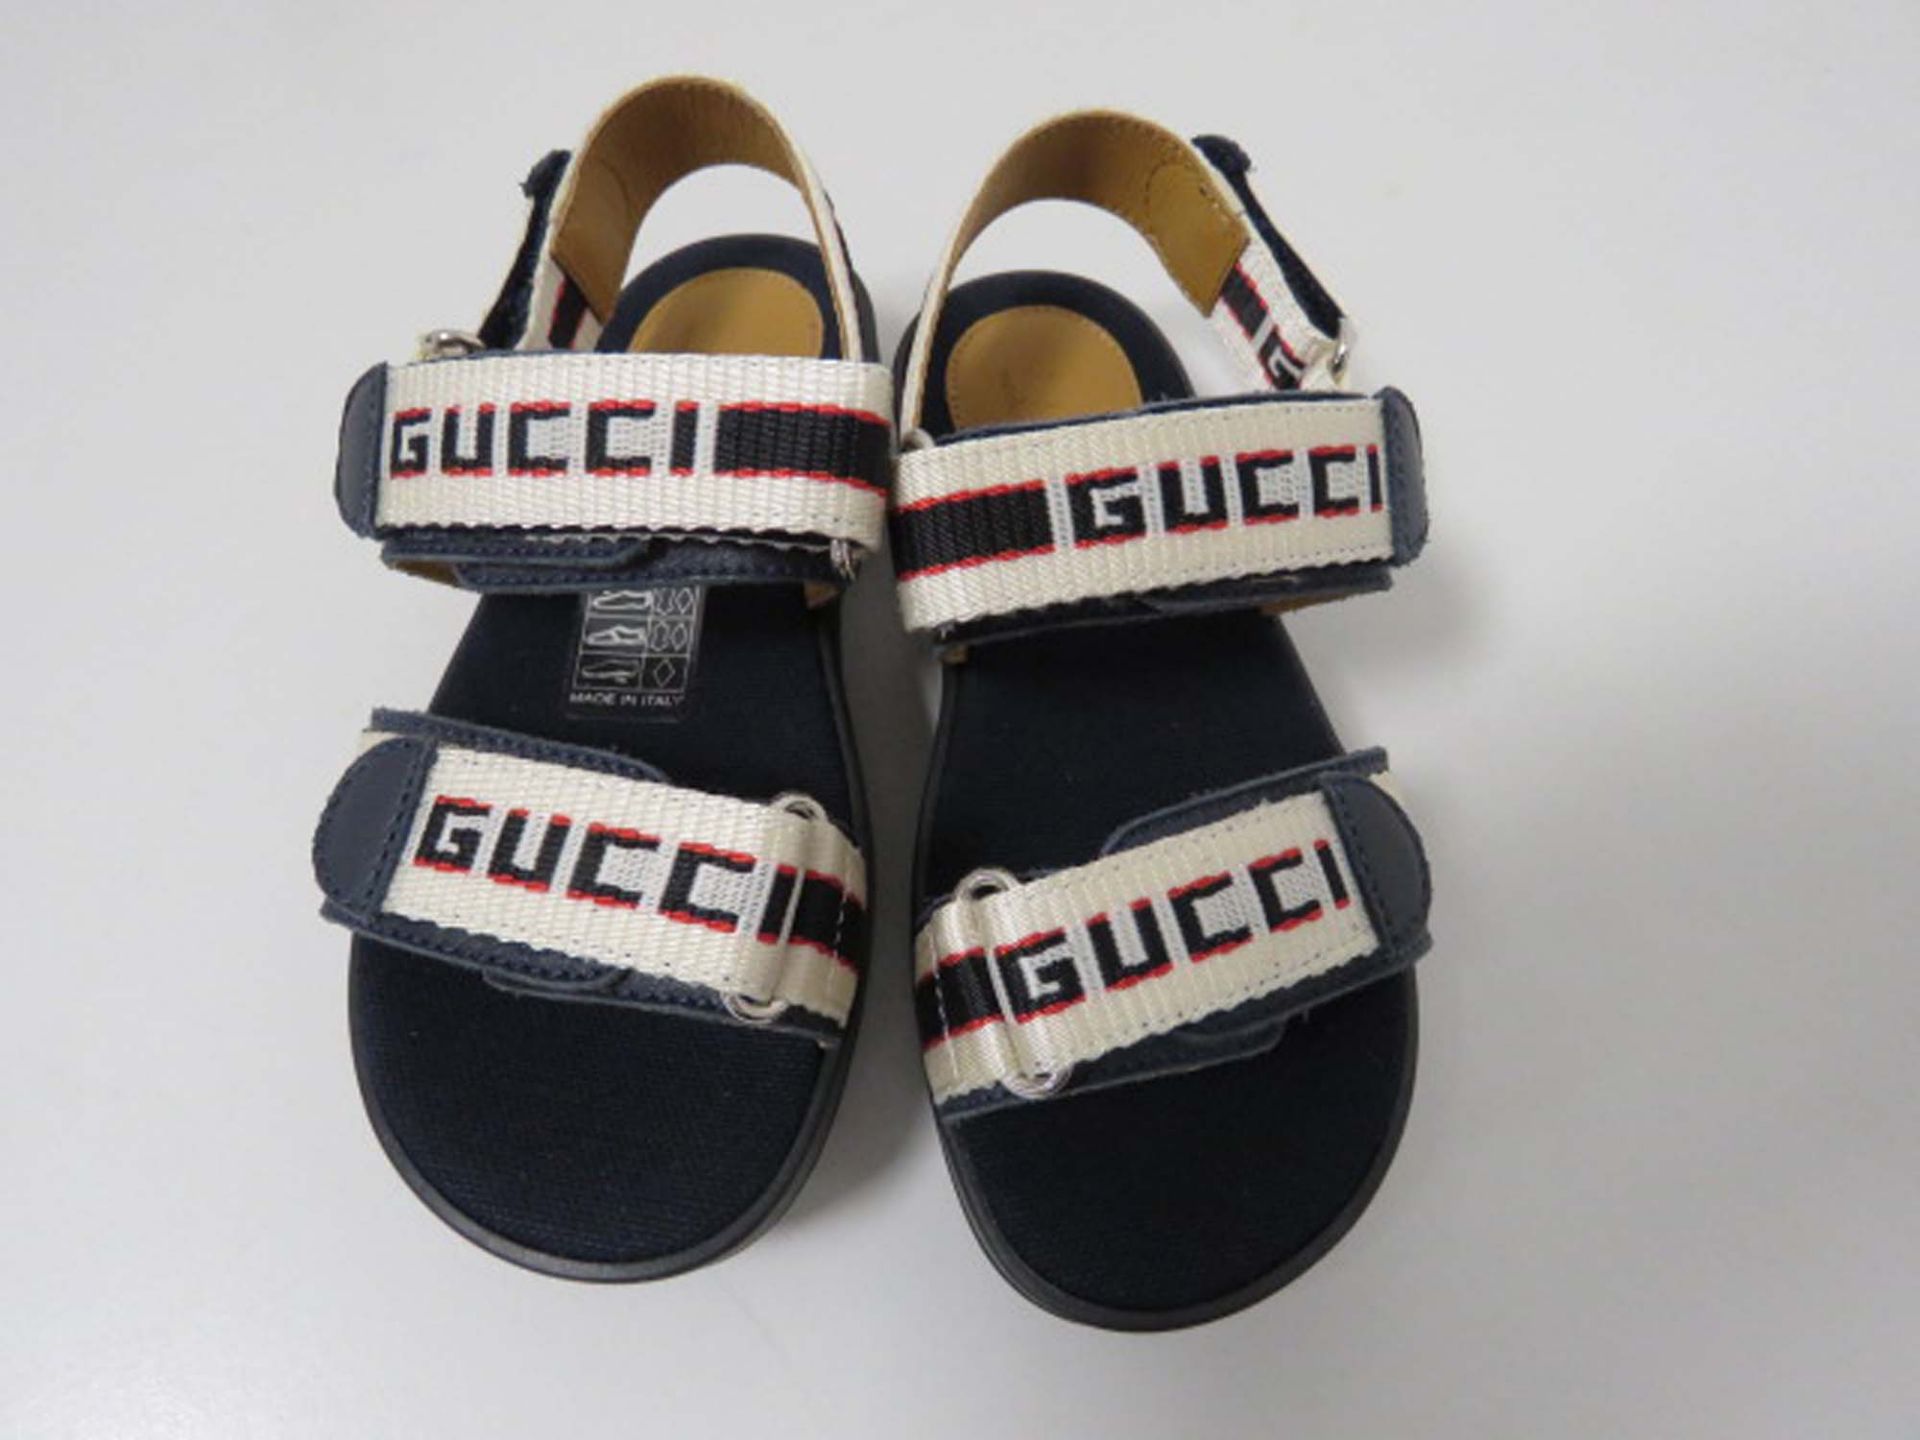 Gucci children's ivory and navy logo sandals size UK8.5 - Image 2 of 3